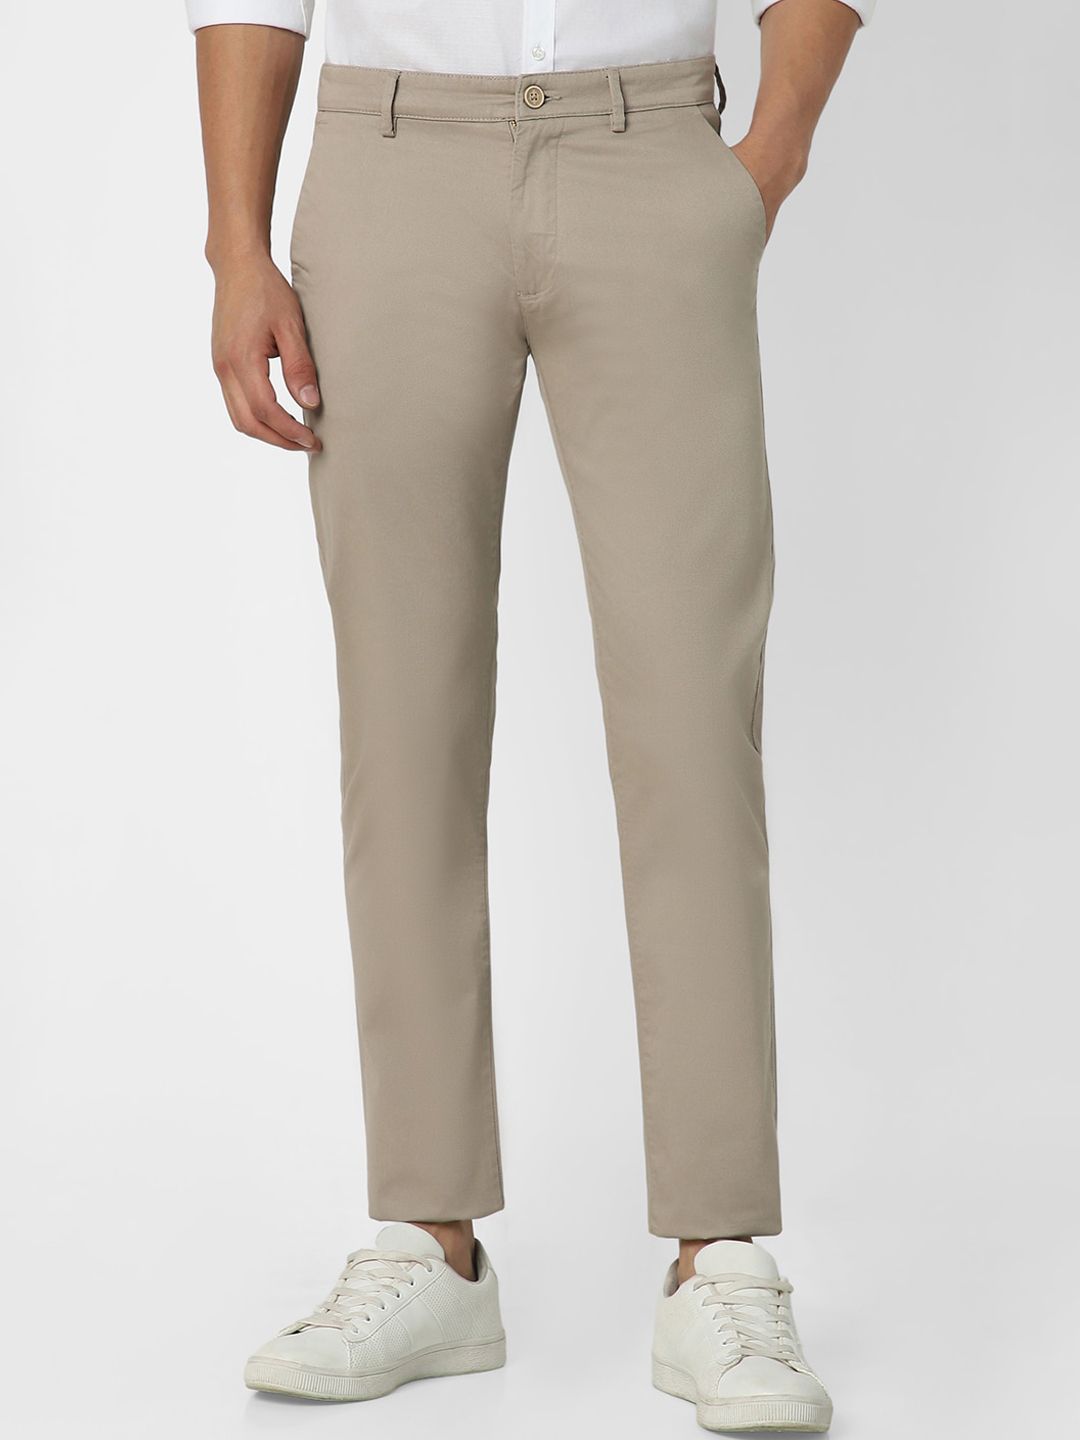 Buy Peter England Men Black Solid Slim fit Chinos Online at Low Prices in  India - Paytmmall.com